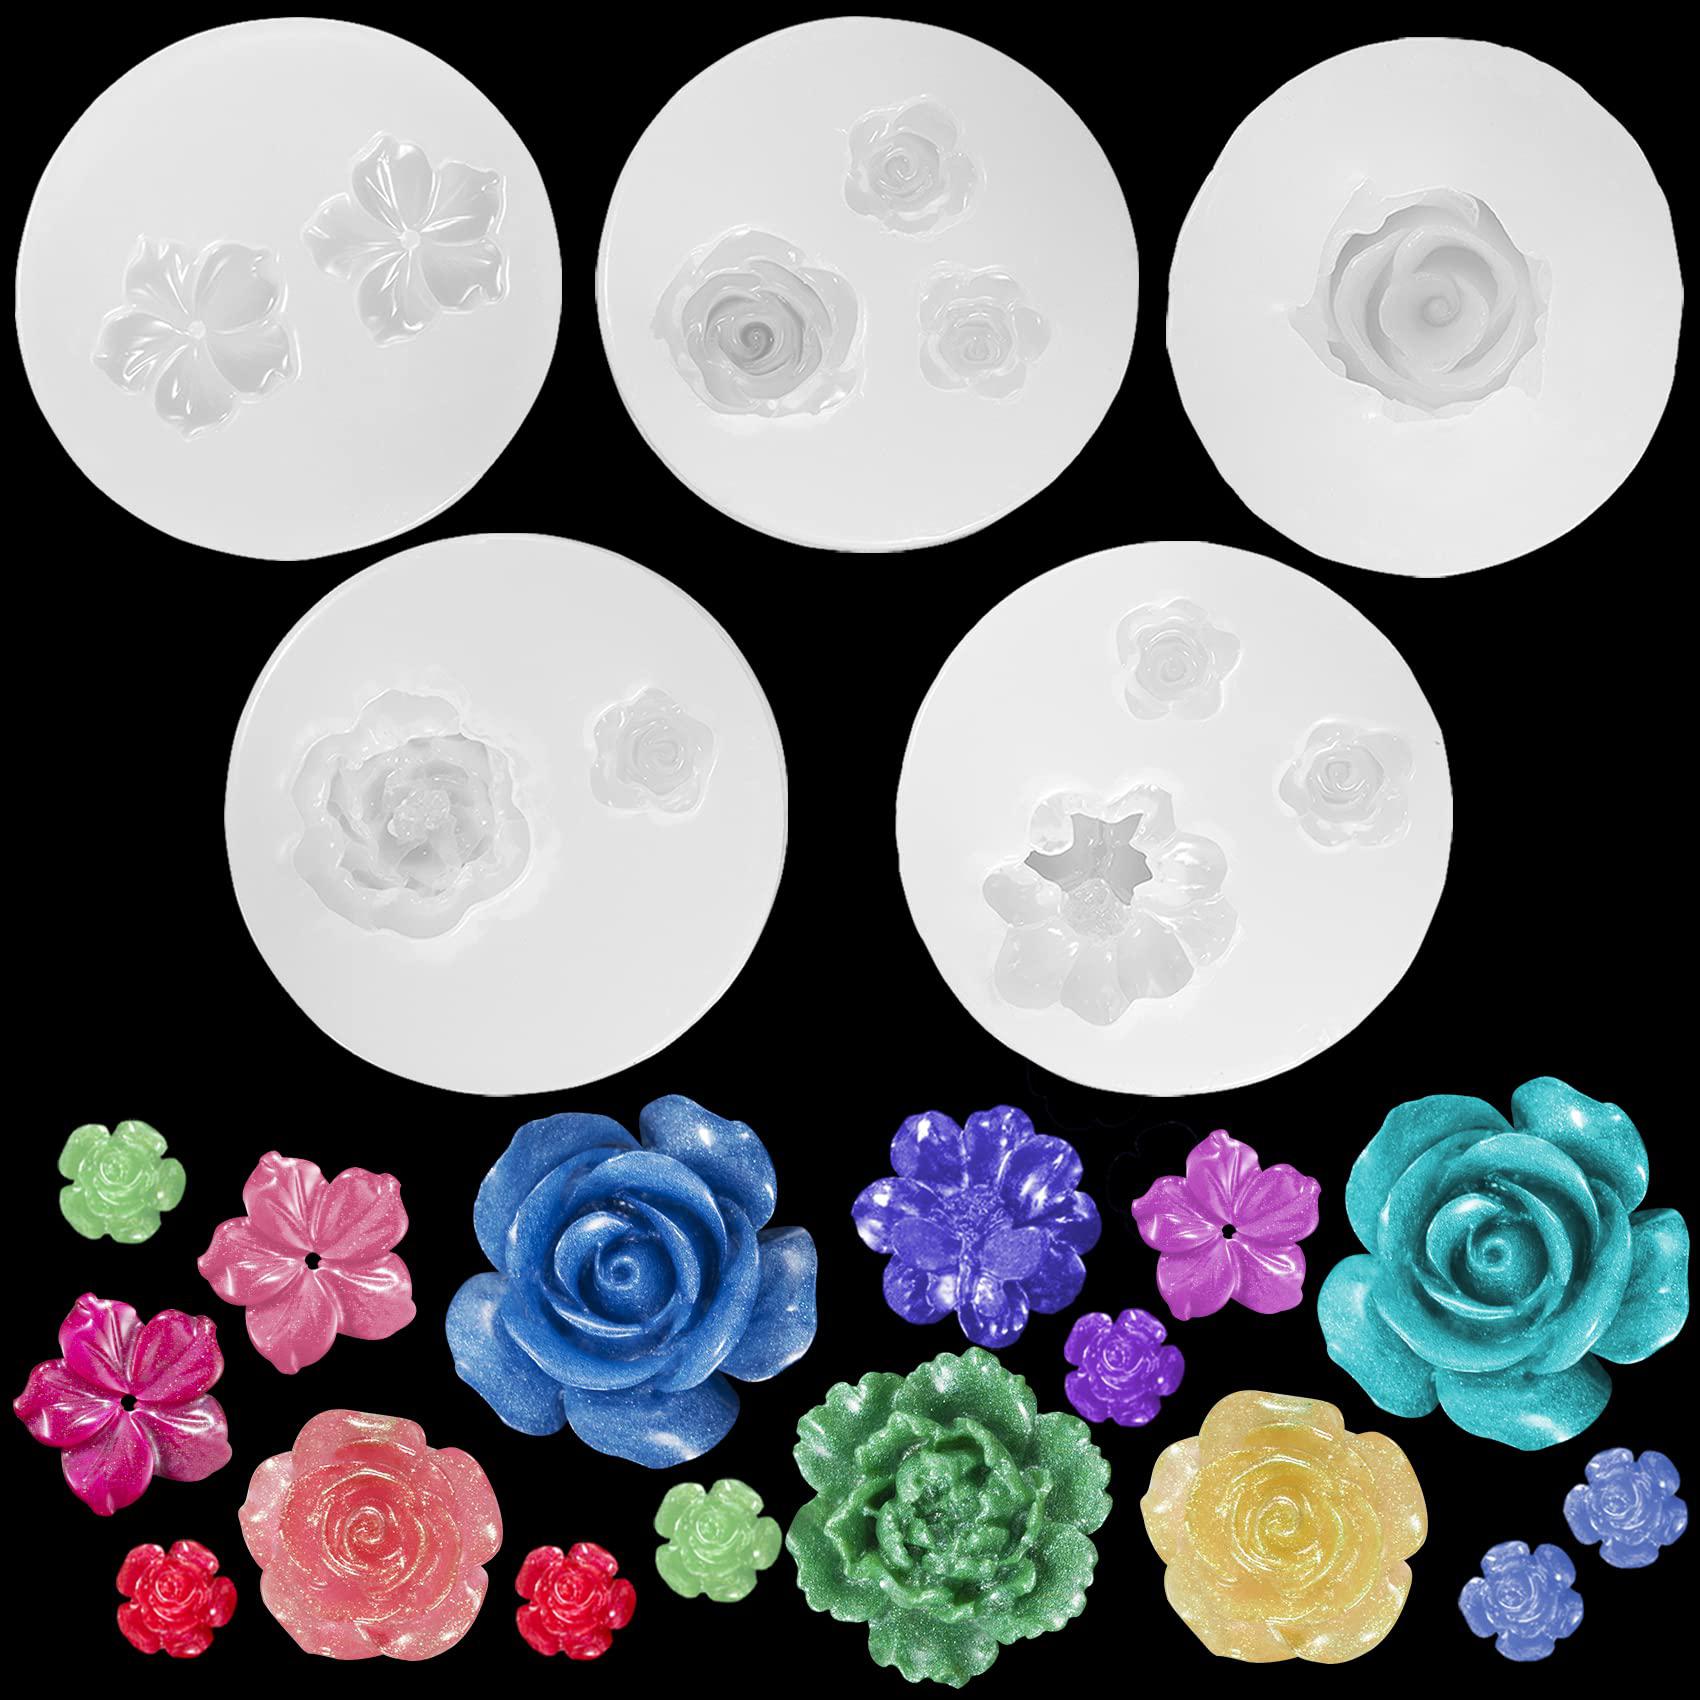 PAGOW 5pcs Mini Mirror Flower Resin Mold, Silicone 3D Flower Crystal DIY Casting Molds, for Earring, Jewelry Pendants Making